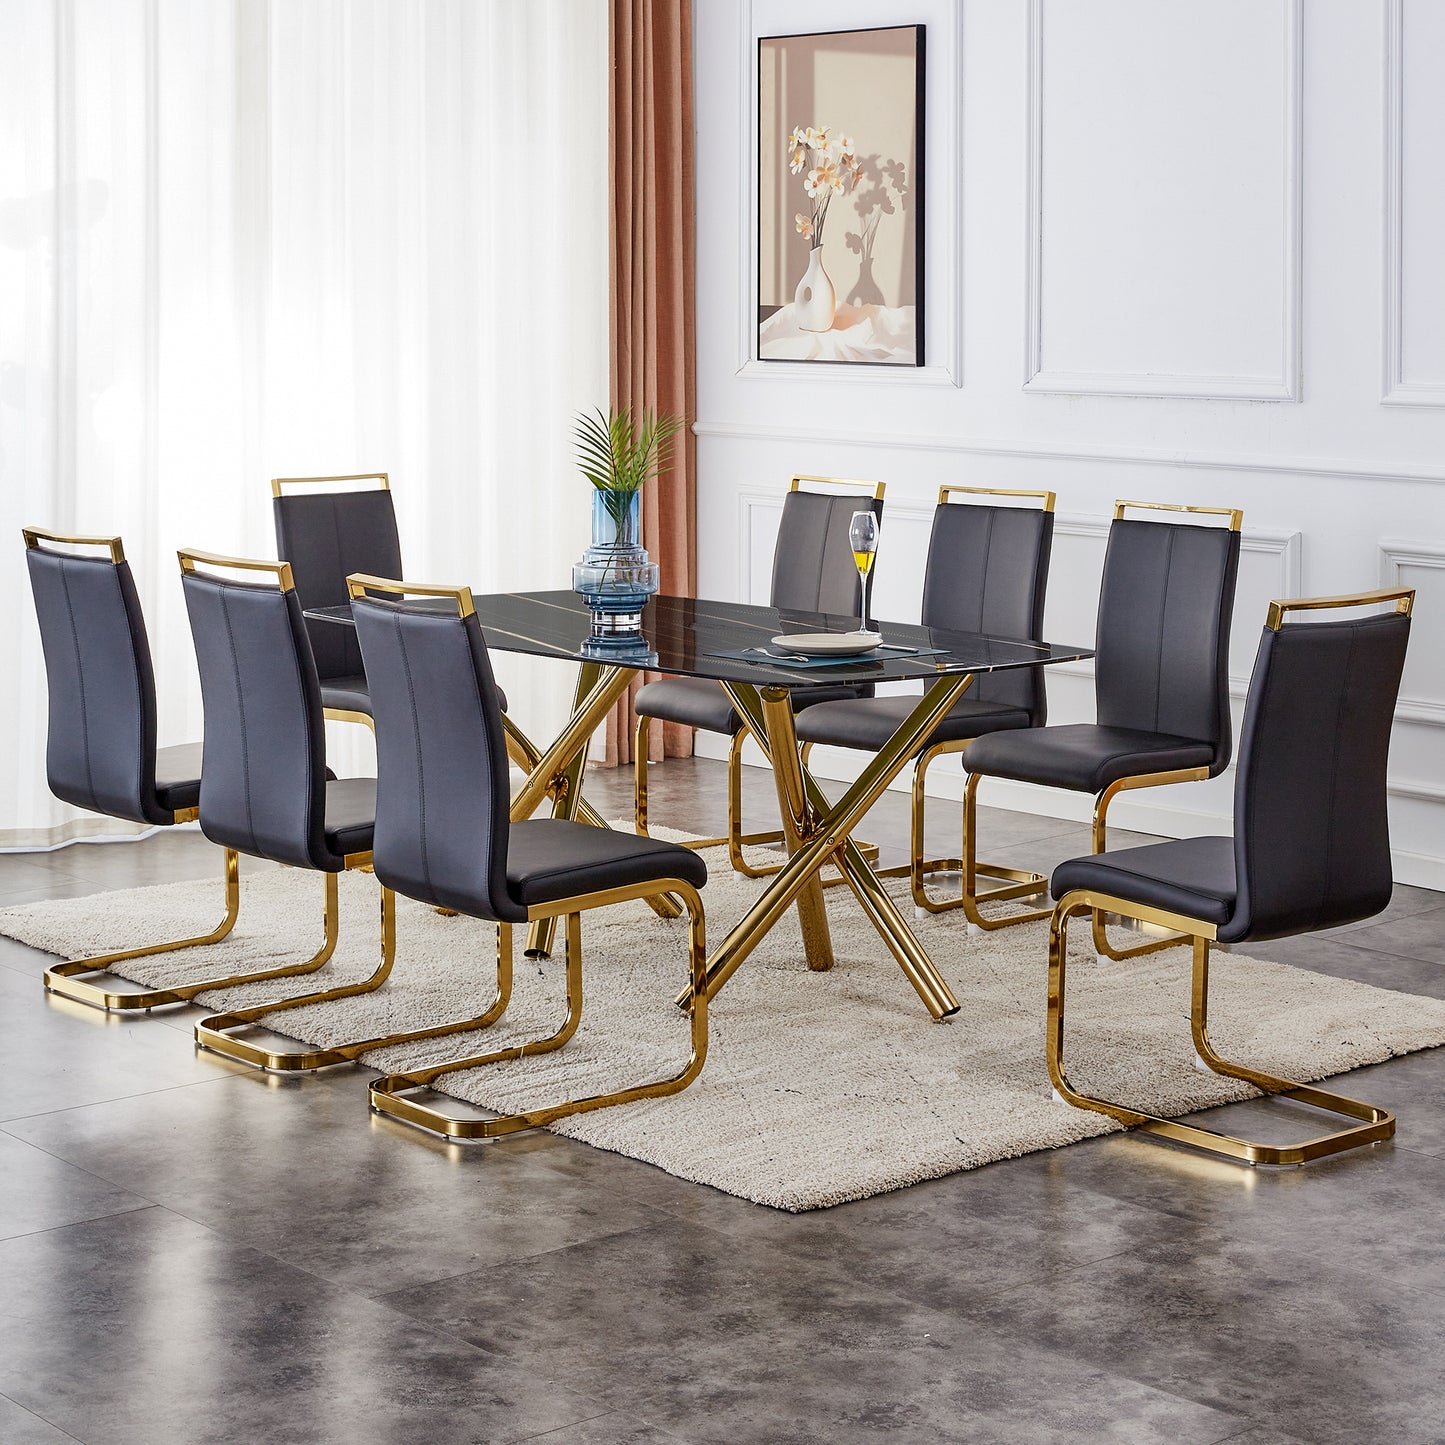 Large modern minimalist rectangular dining table with 0.39 "imitation marble black desktop and gold metal legs, for Kitchen Dining Living Meeting Room Banquet hal  1538